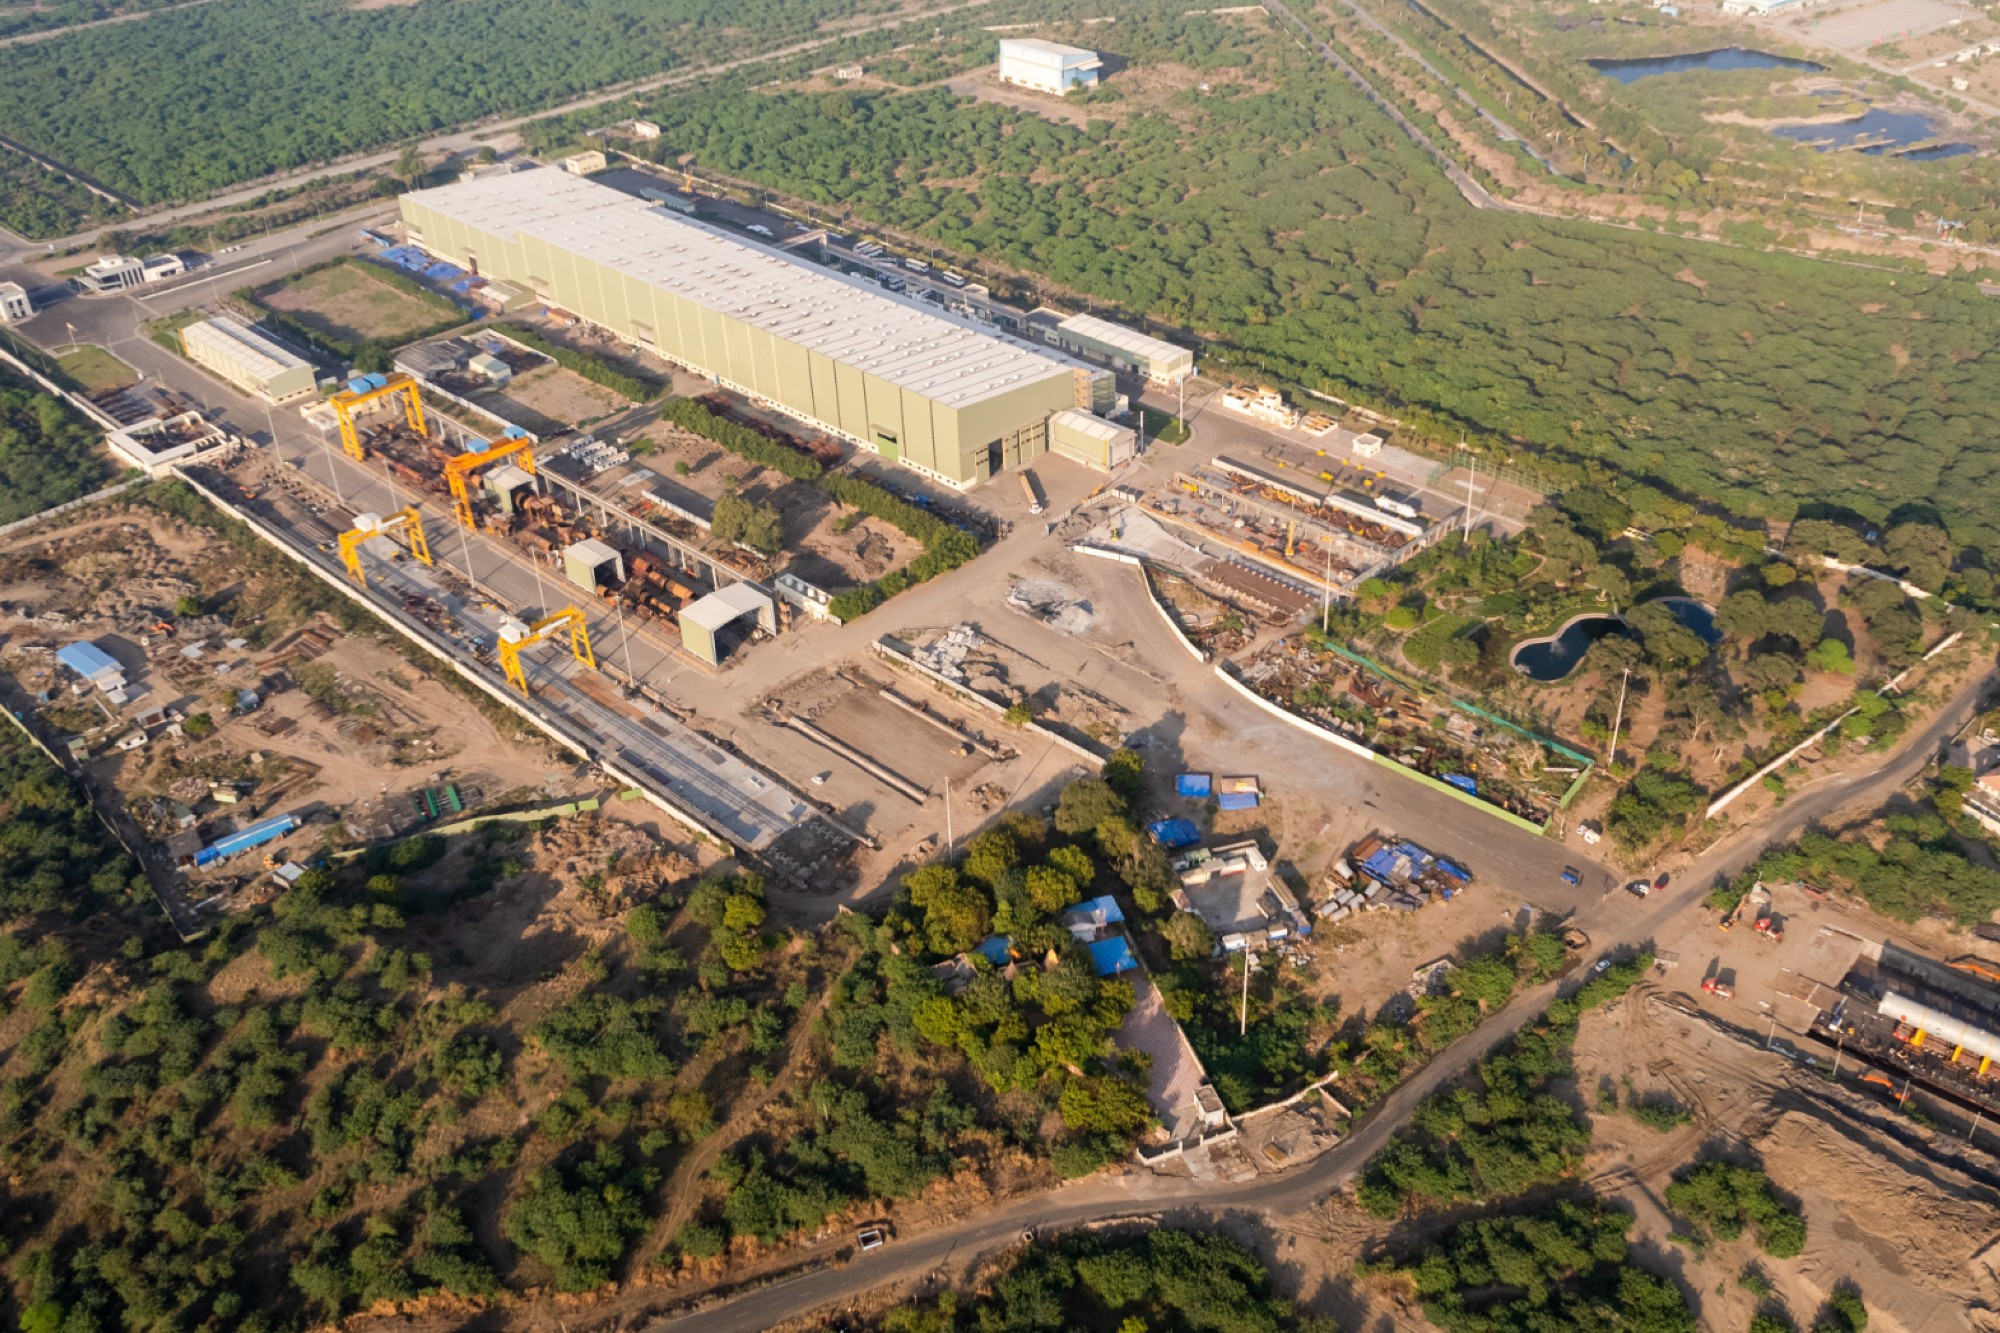 Godrej & Boyce contributes to commercial-scale green hydrogen production facility